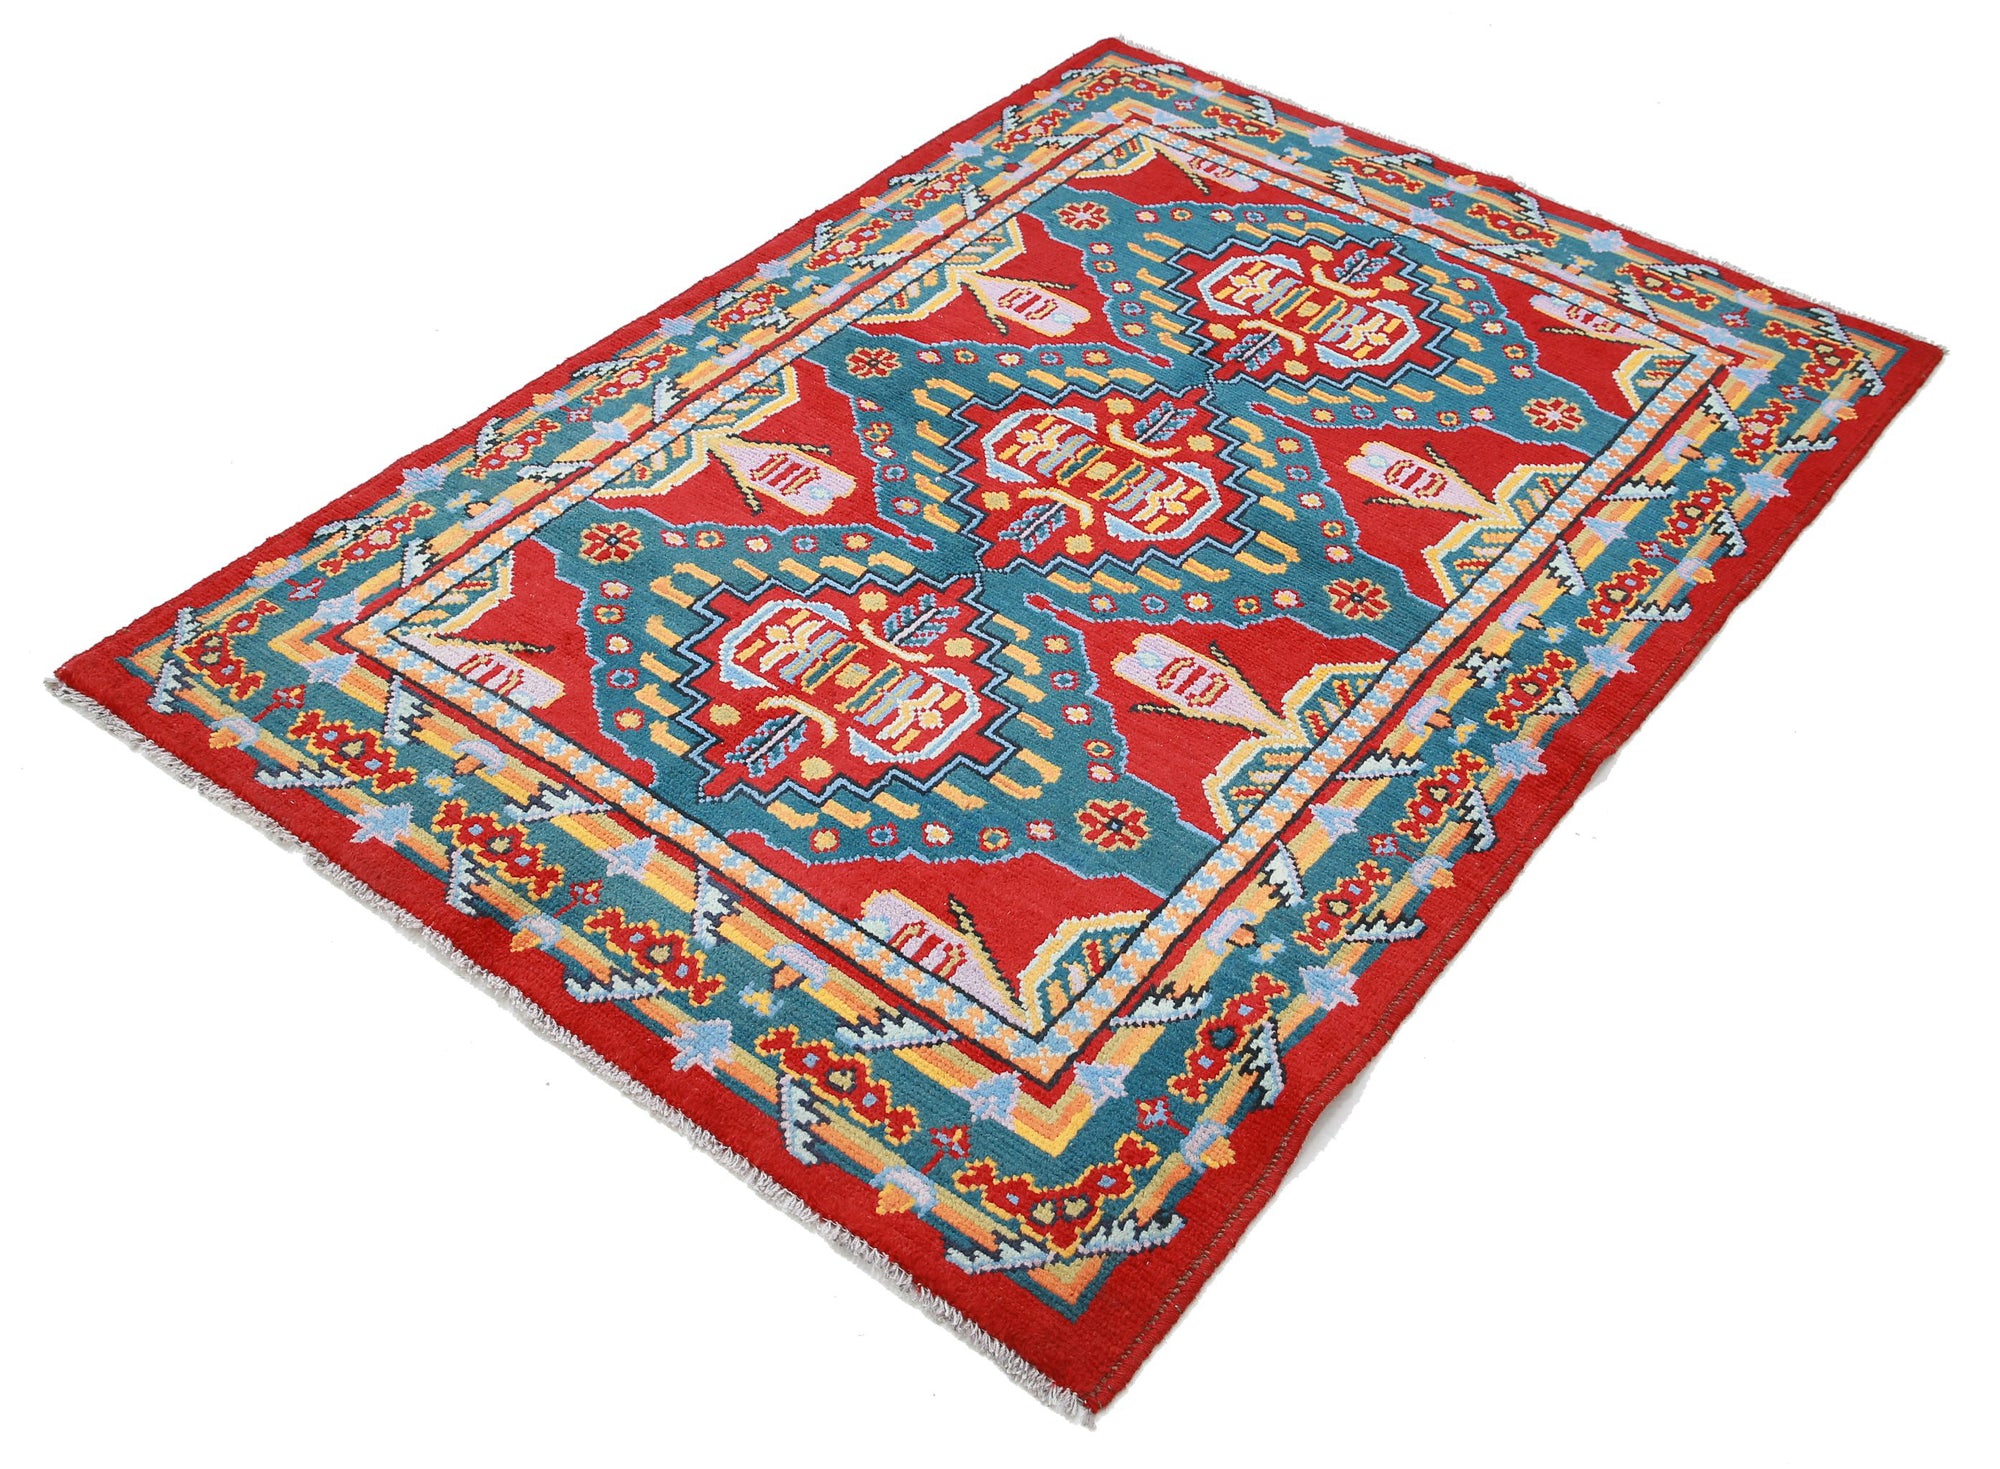 Revival-hand-knotted-qarghani-wool-rug-5014210-2.jpg